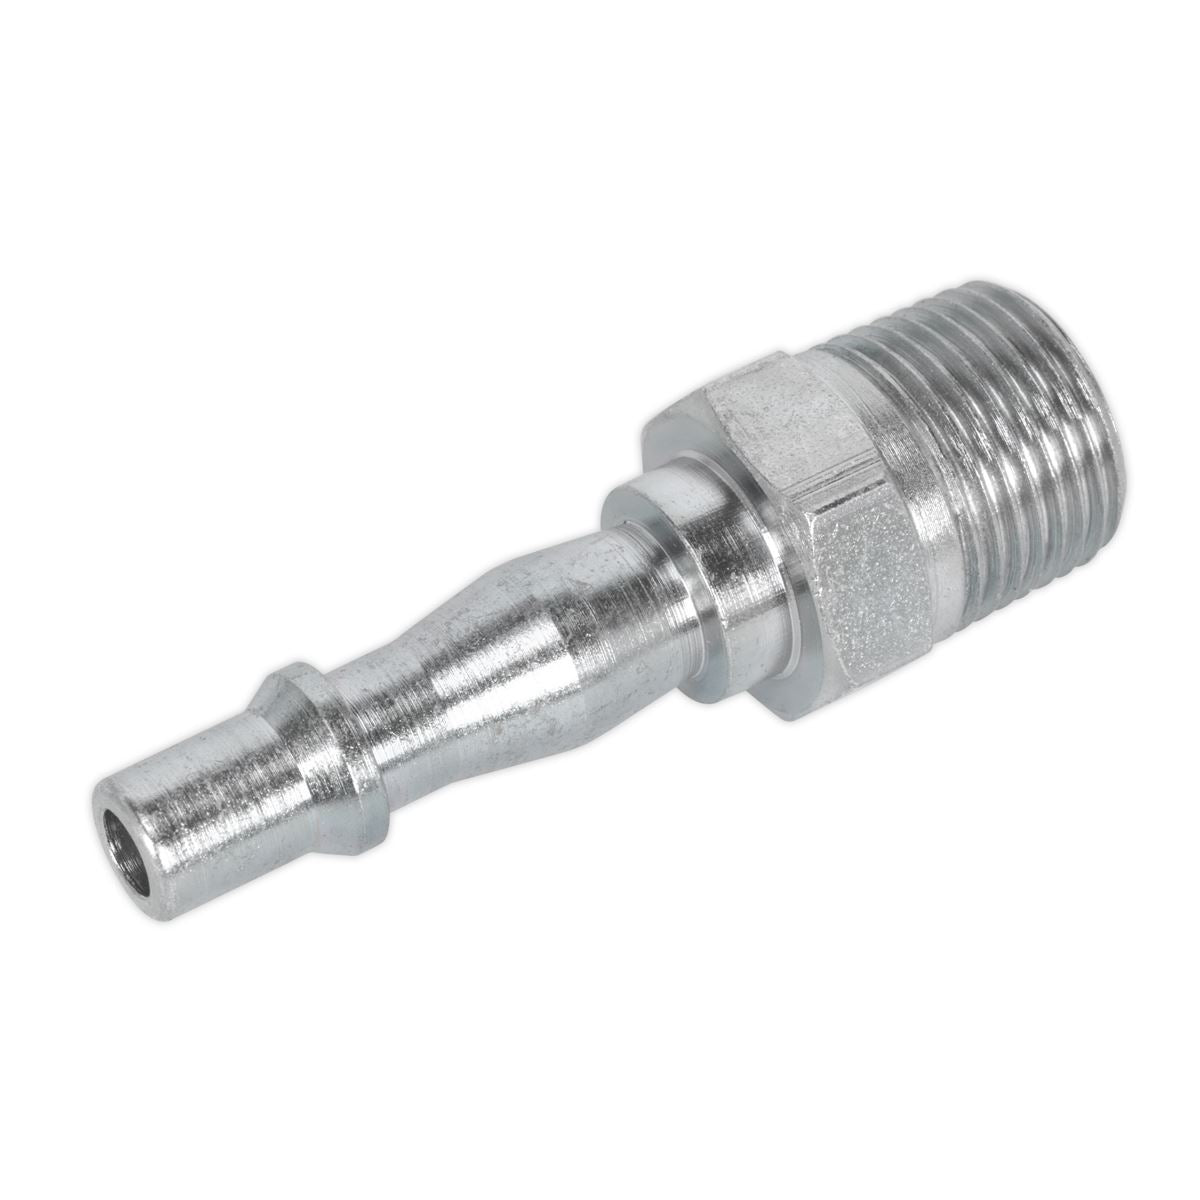 PCL Screwed Adaptor Male 3/8"BSPT Pack of 5